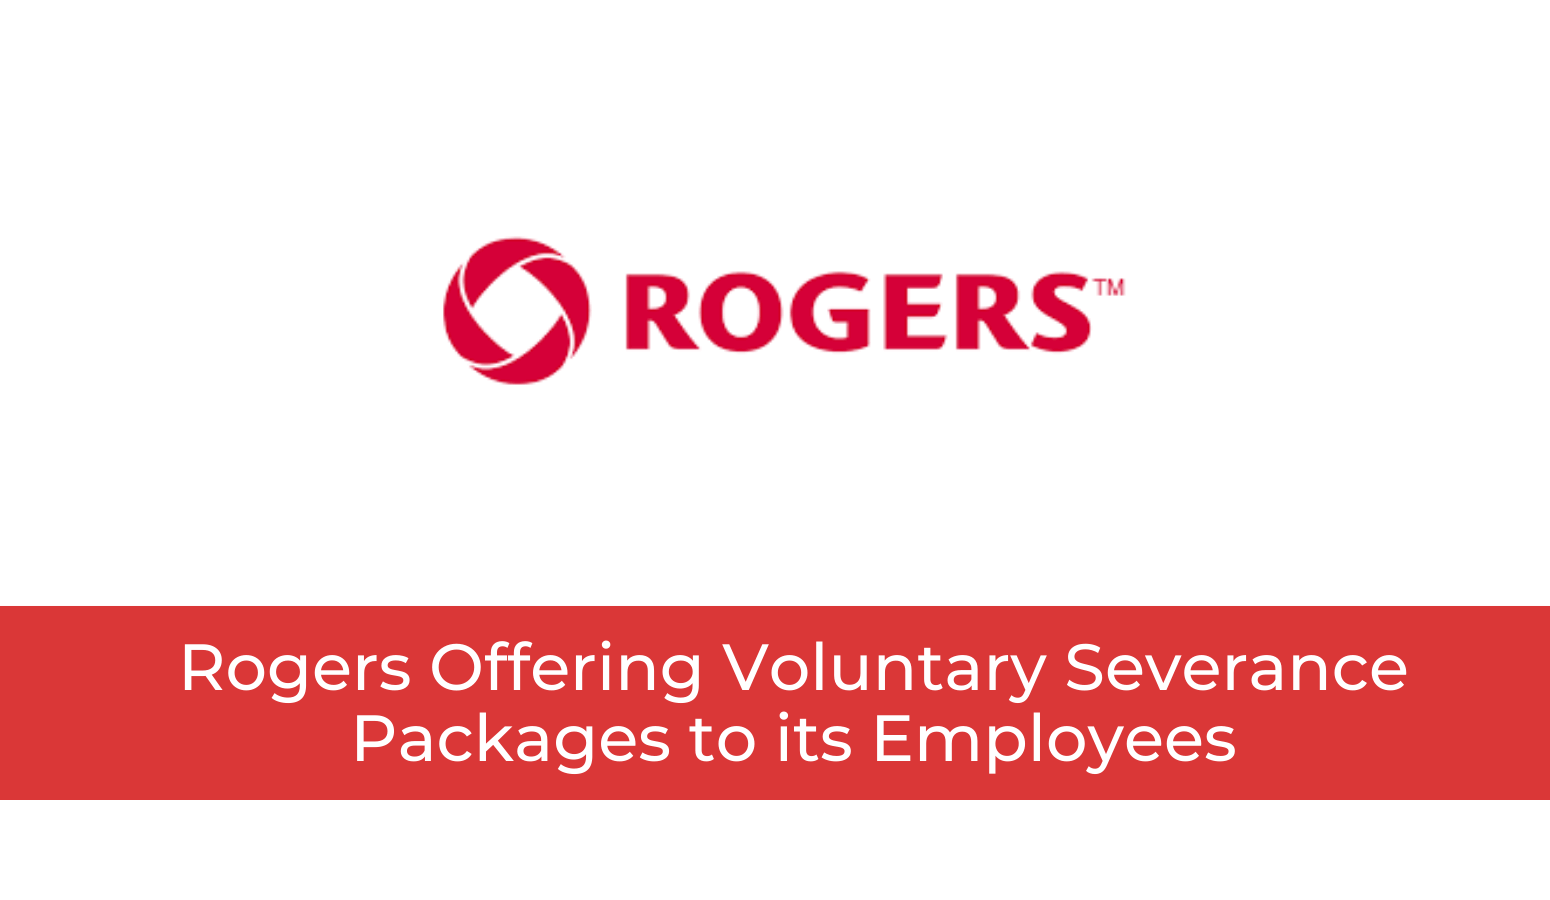 Featured image for “Rogers Offering Voluntary Severance Packages to its Employees”